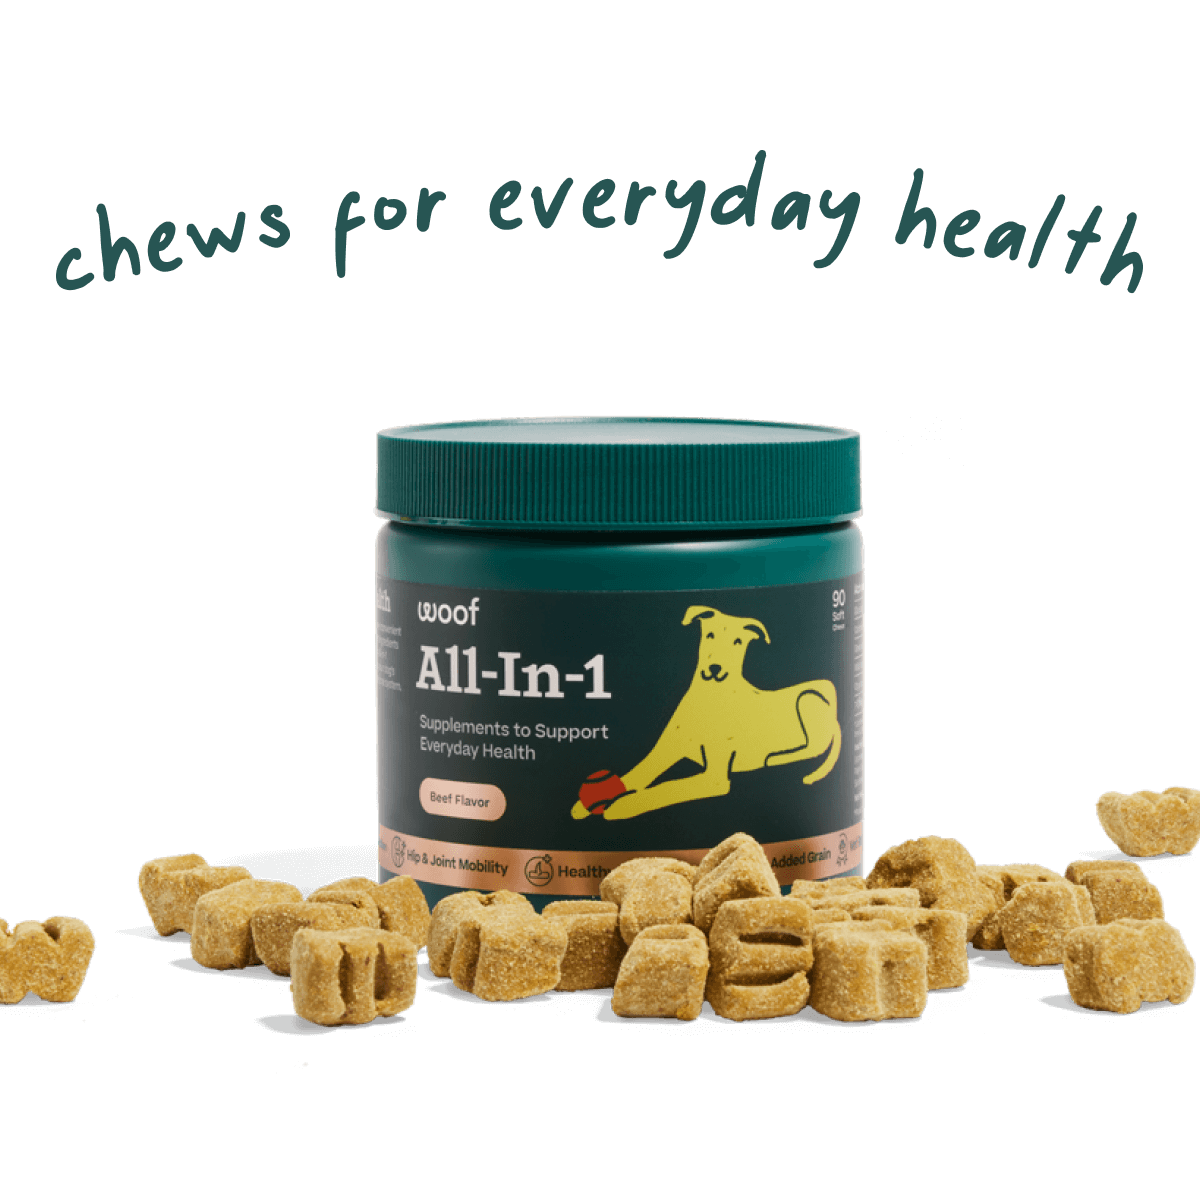 All-in-1 Chews